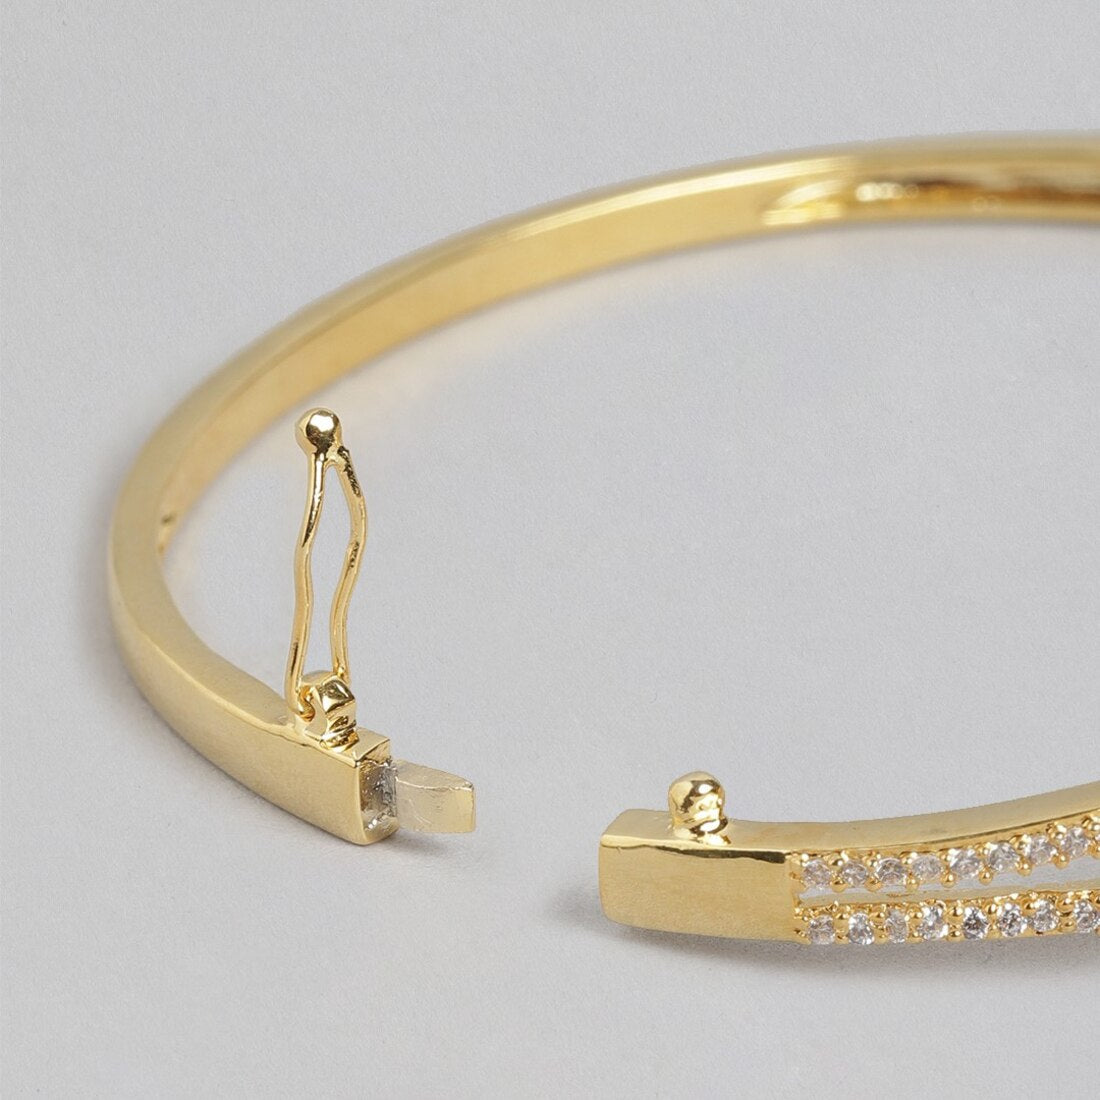 Enchanting Harmony Gold-Plated 925 Sterling Silver Bracelet